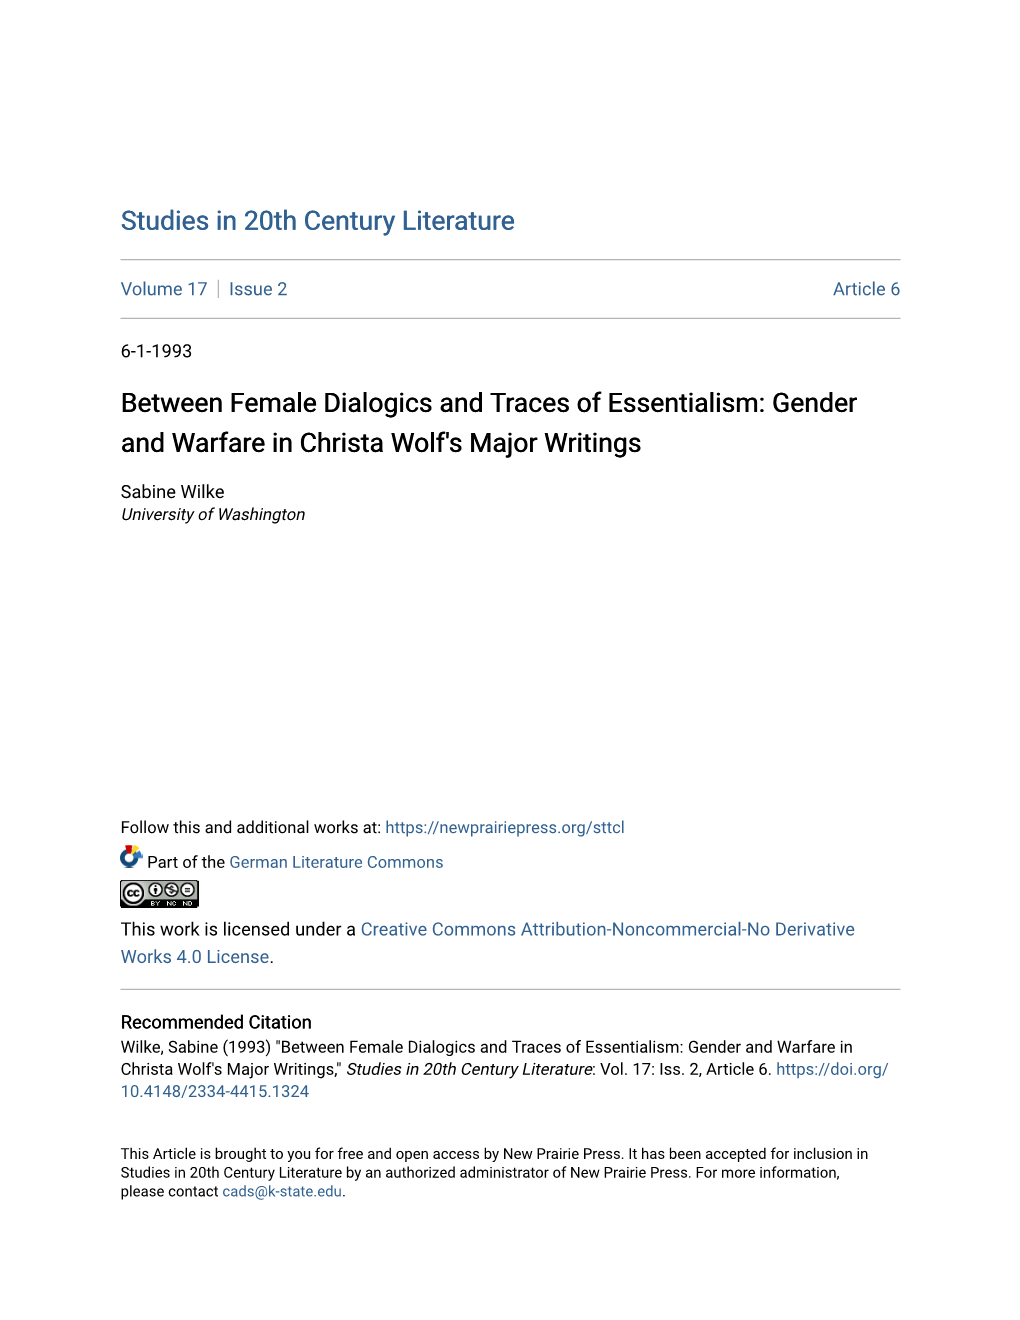 Gender and Warfare in Christa Wolf's Major Writings